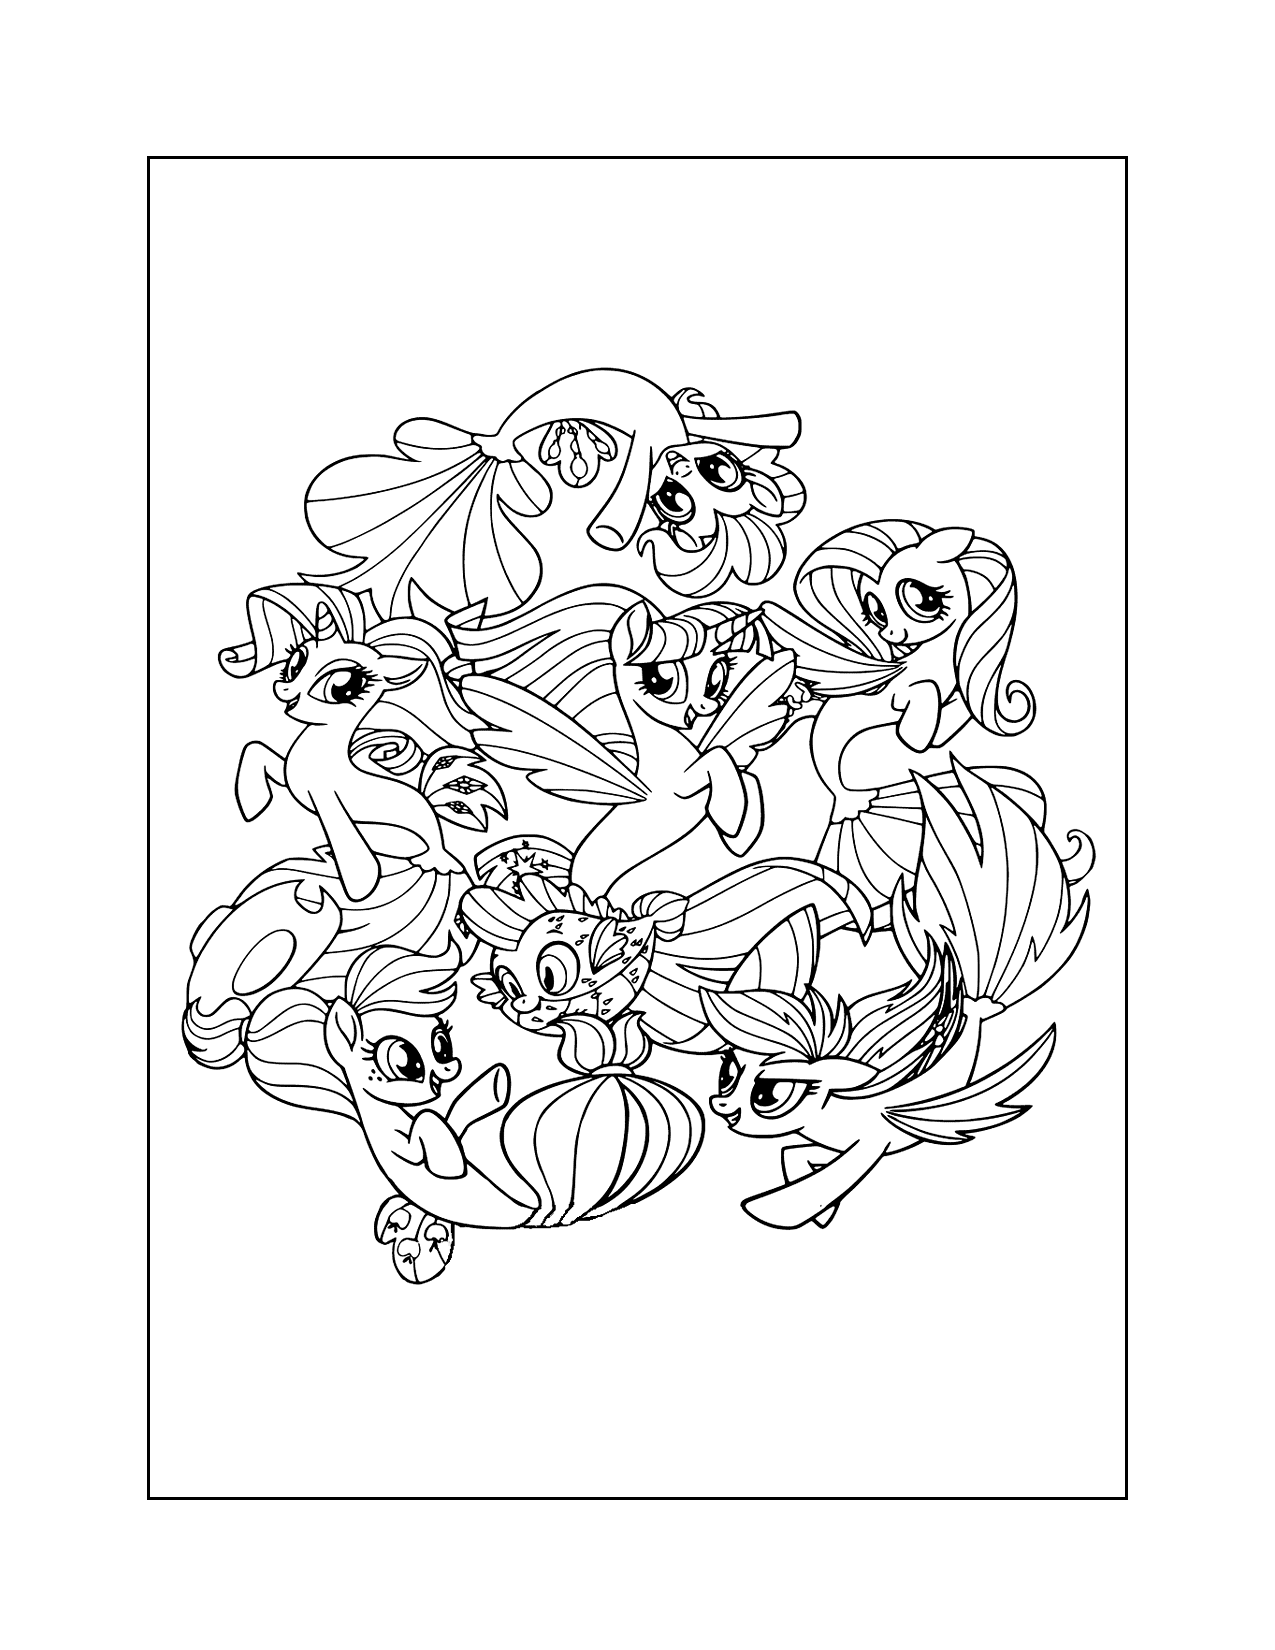 My Little Pony Characters Coloring Page